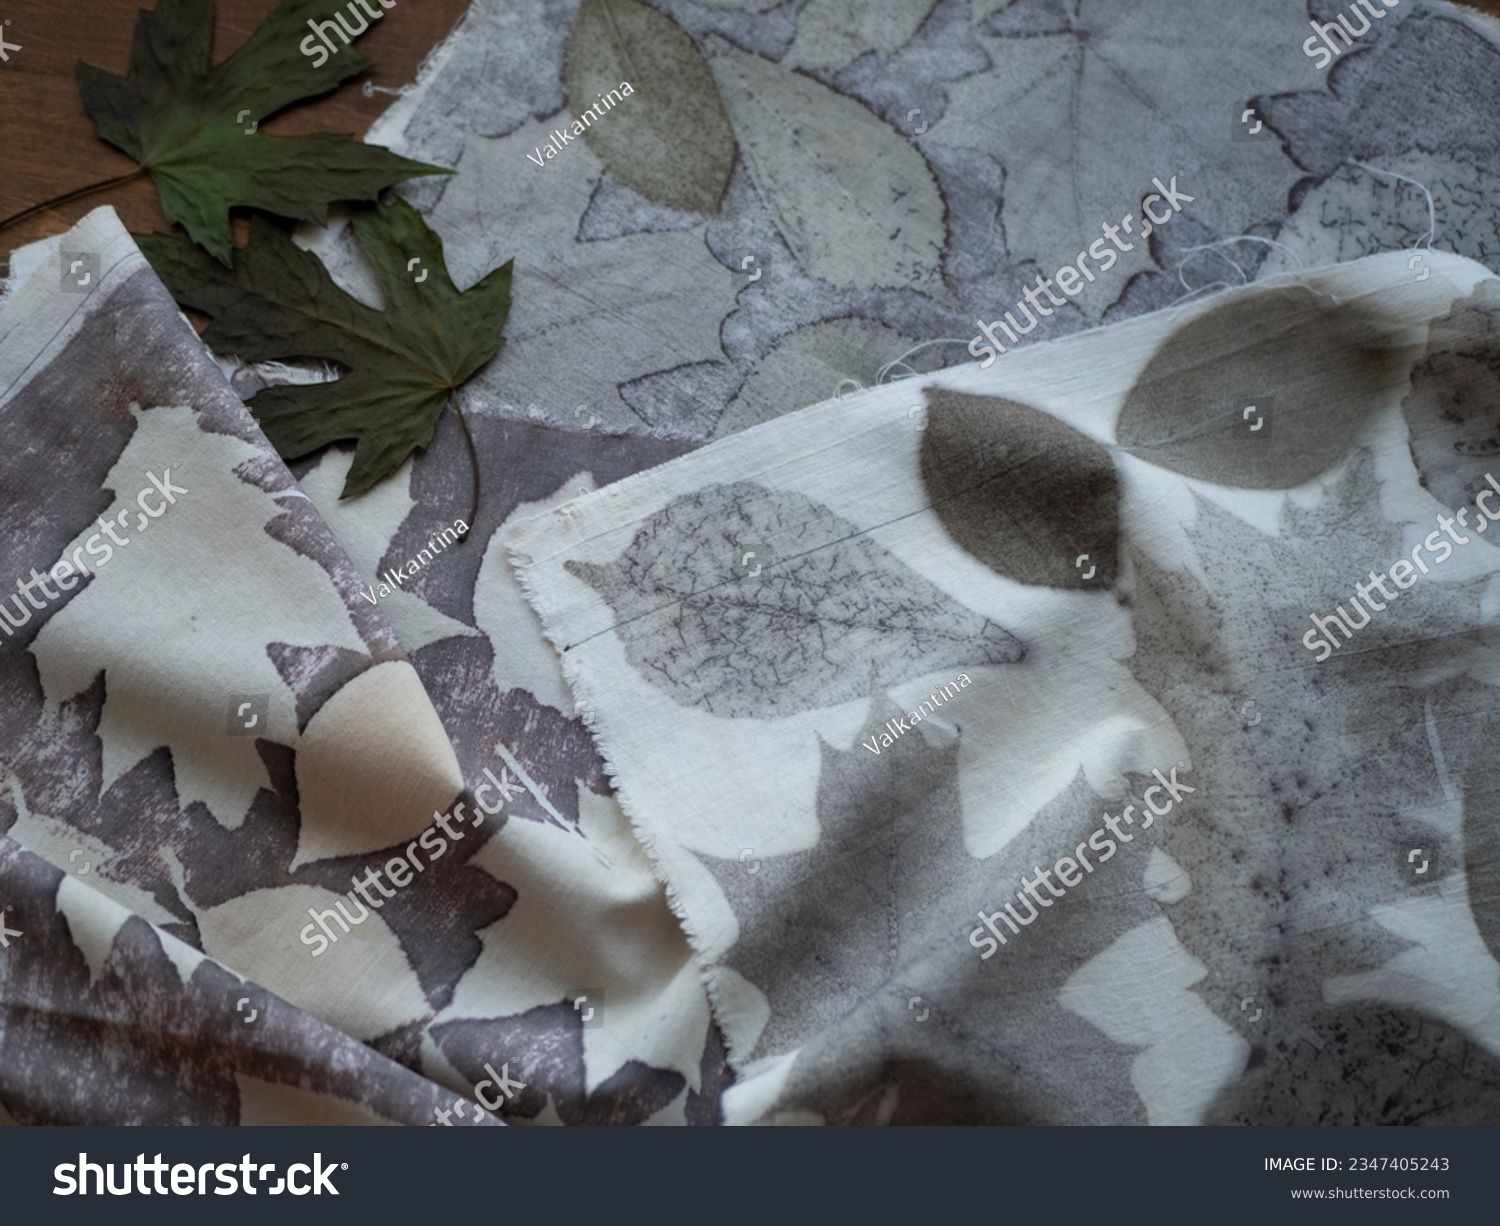 Fabric with leaves pattern and dried plants on the wooden table. Concept of eco print, botanical or natural printing #2347405243